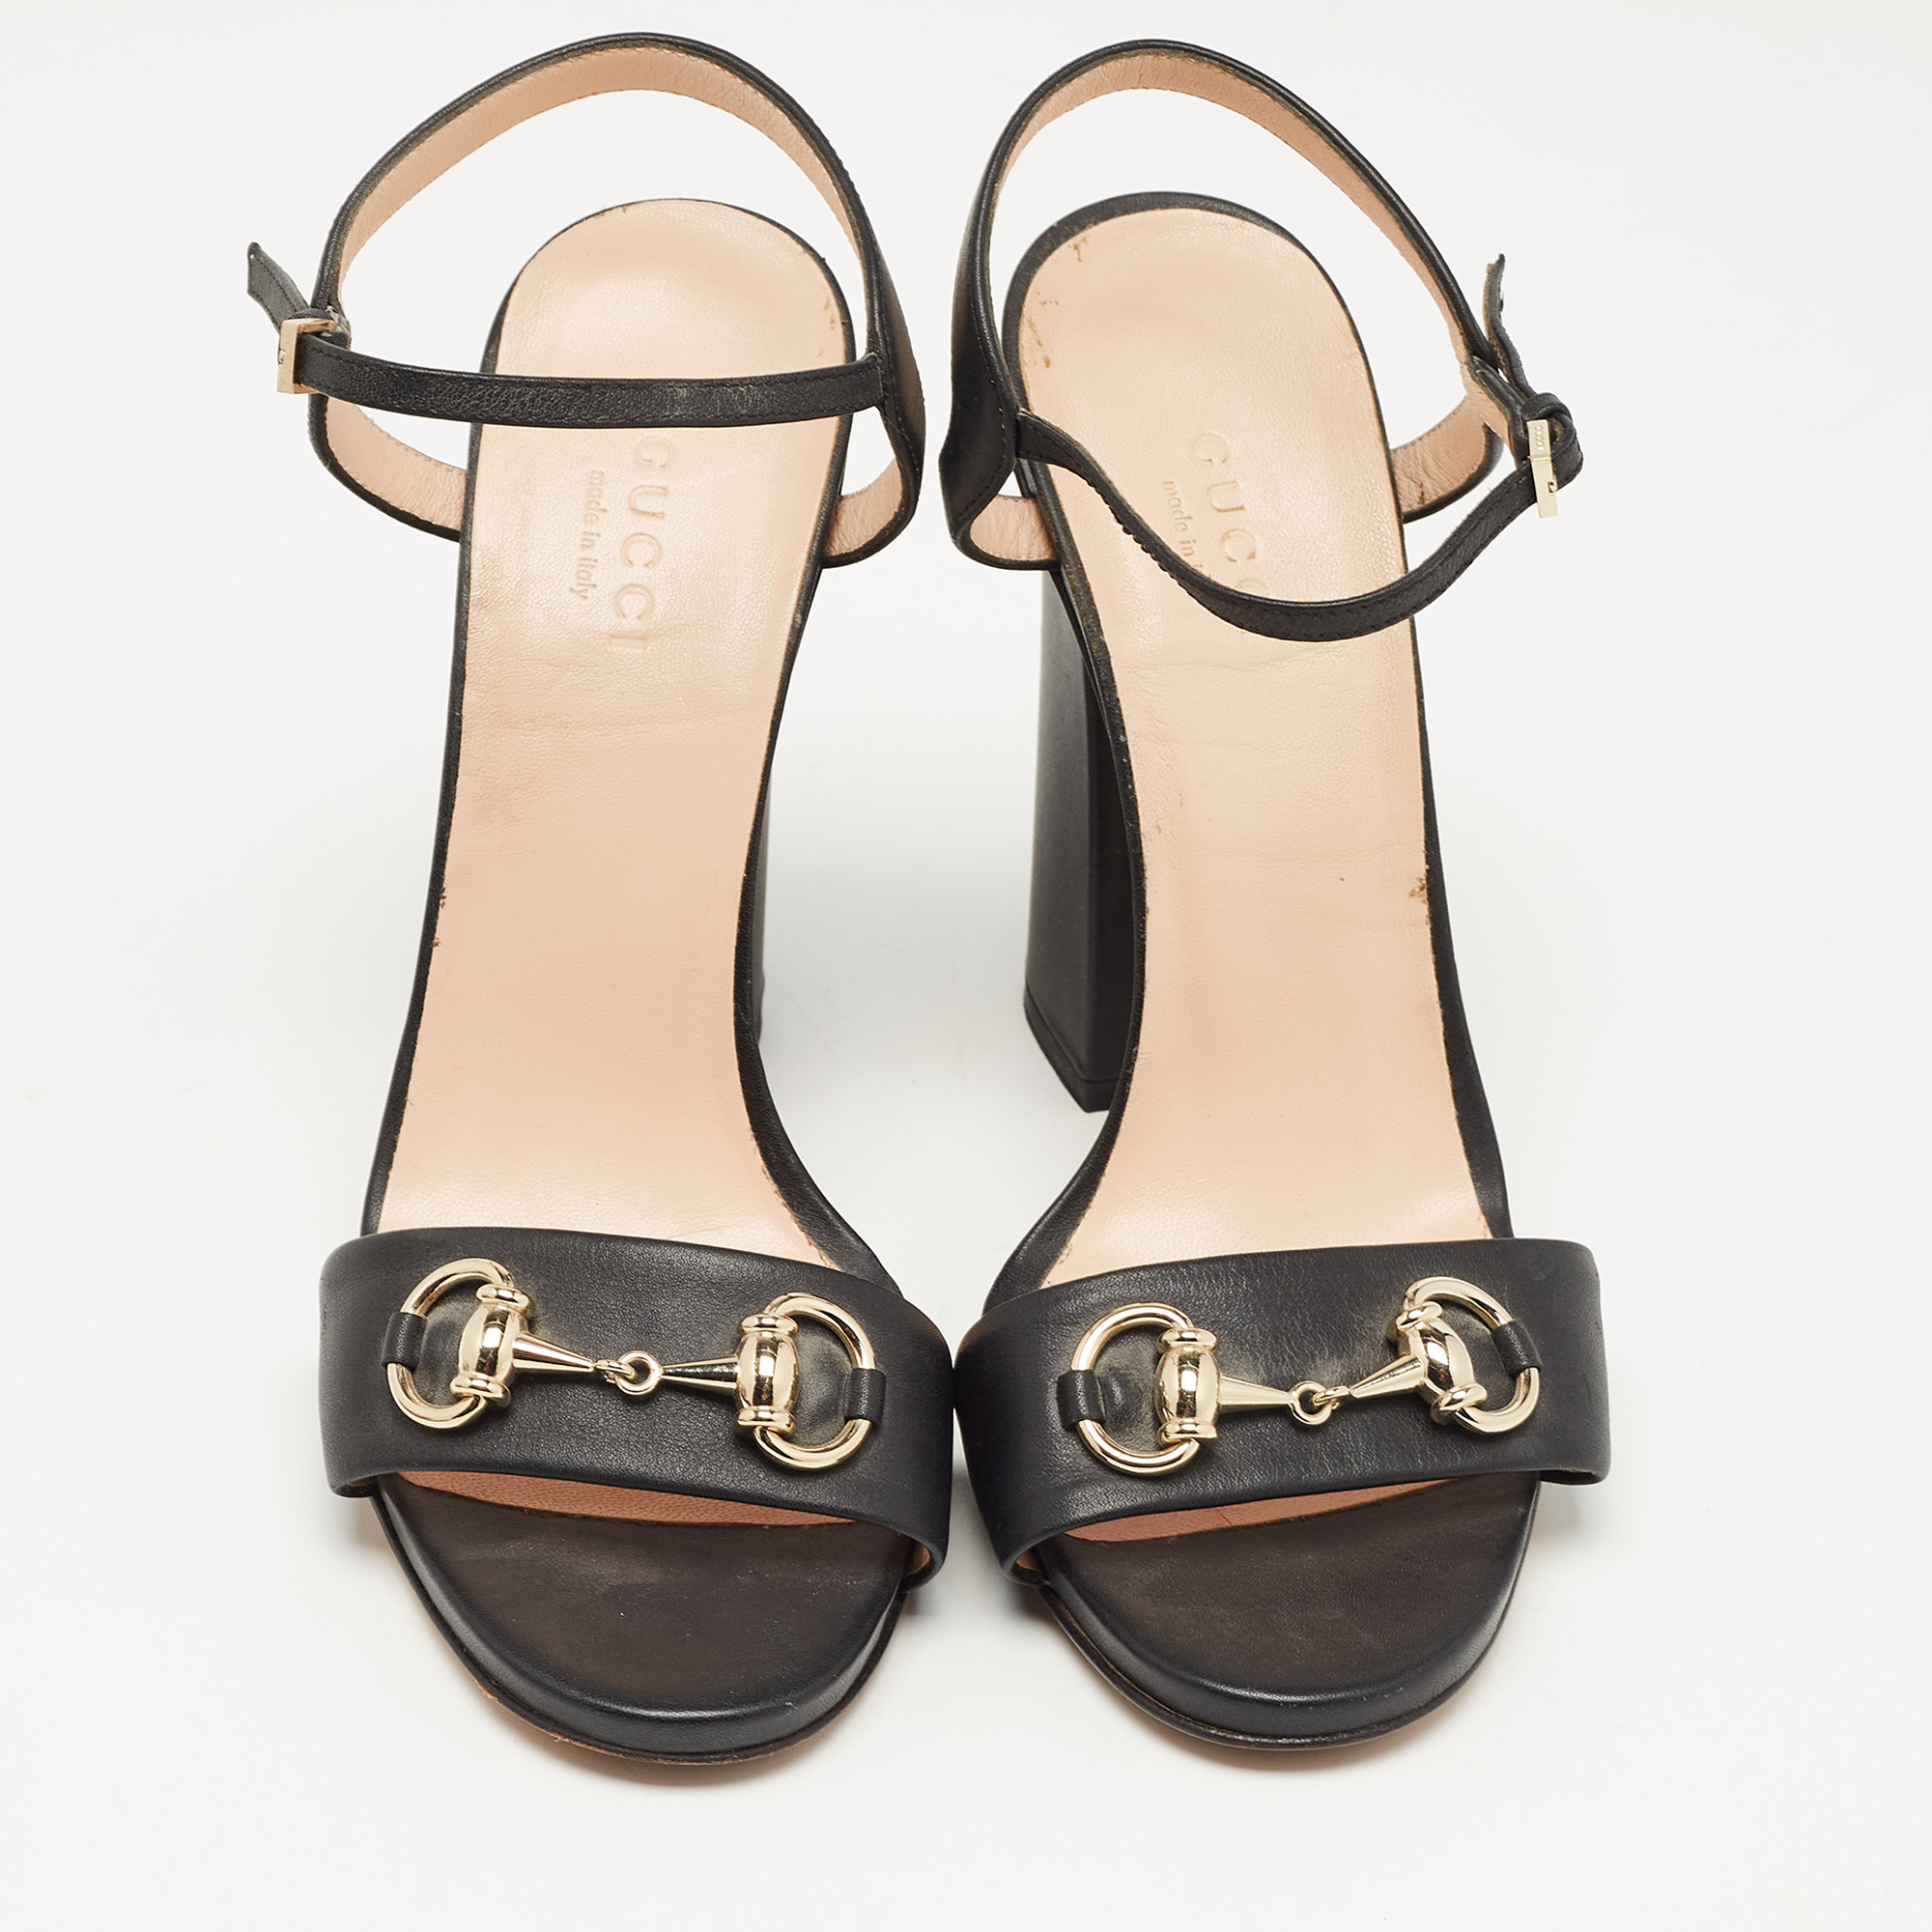 Gucci Black Leather Claudie Ankle Strap Sandals Size 37.5